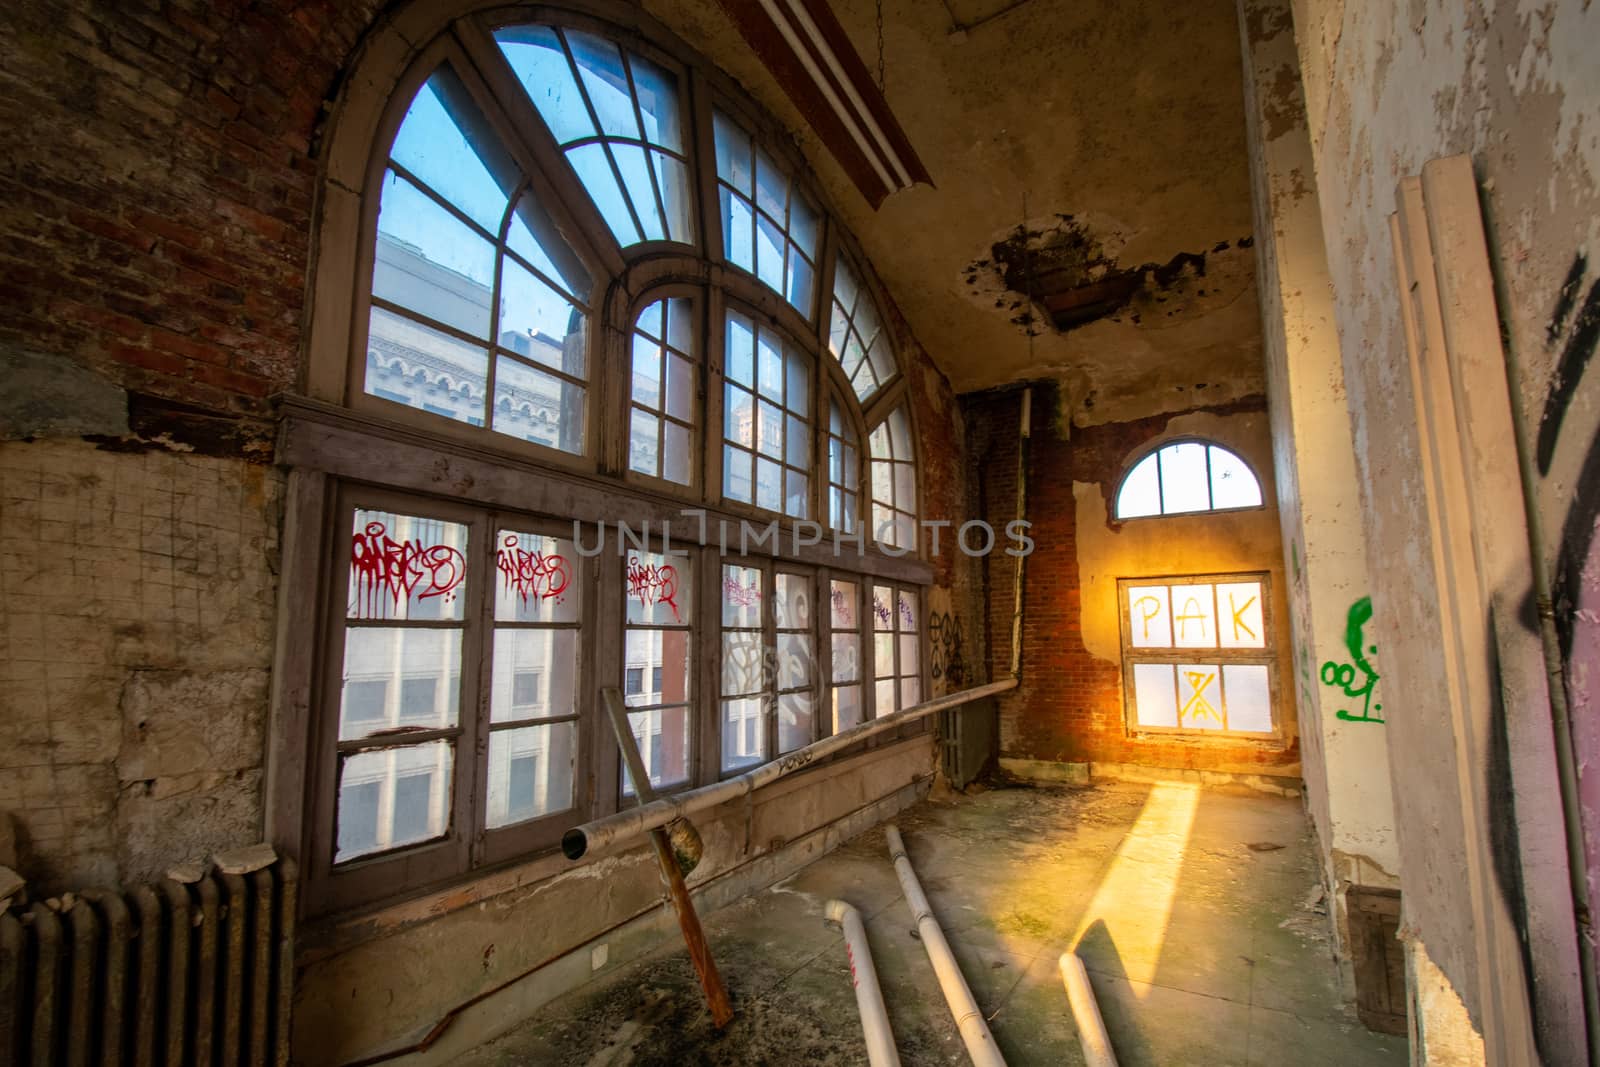 A Small Room in an Abandoned Building With a Large Arched Window by bju12290